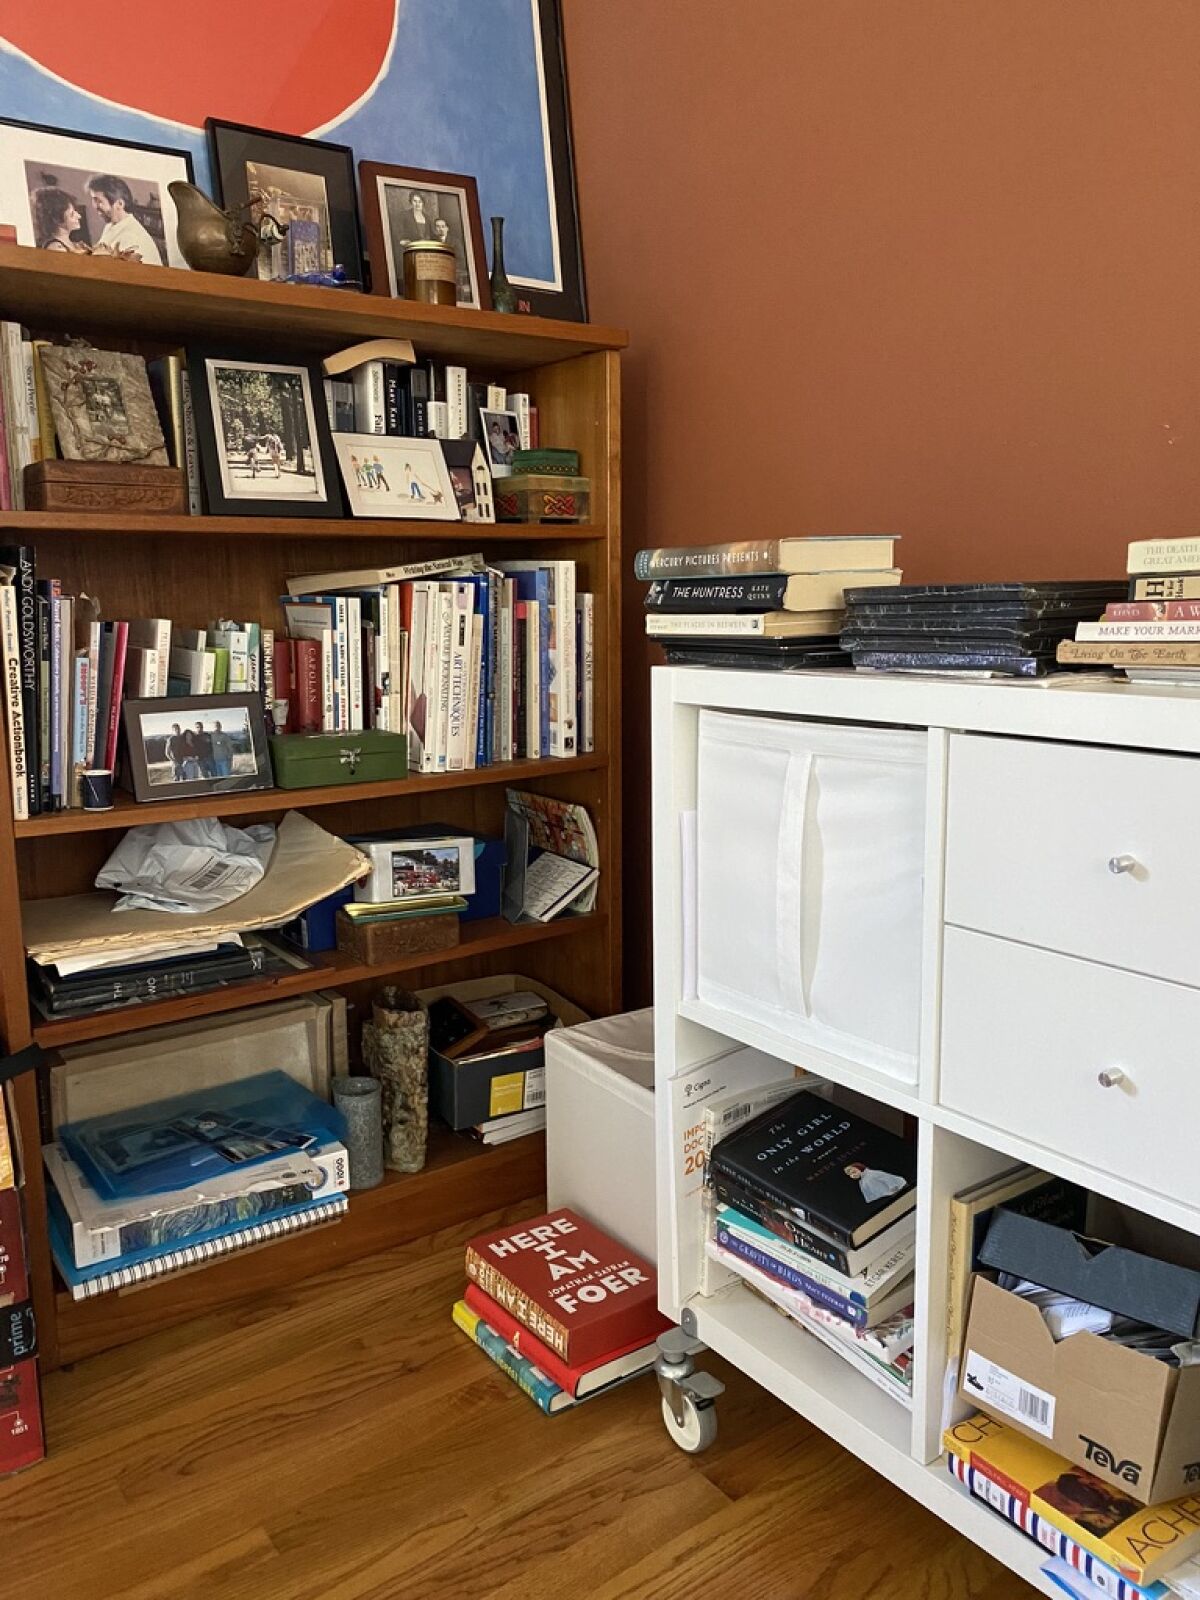 Mimi Sells' literature-laden office contains many of the books she's saved from uncertain fates.